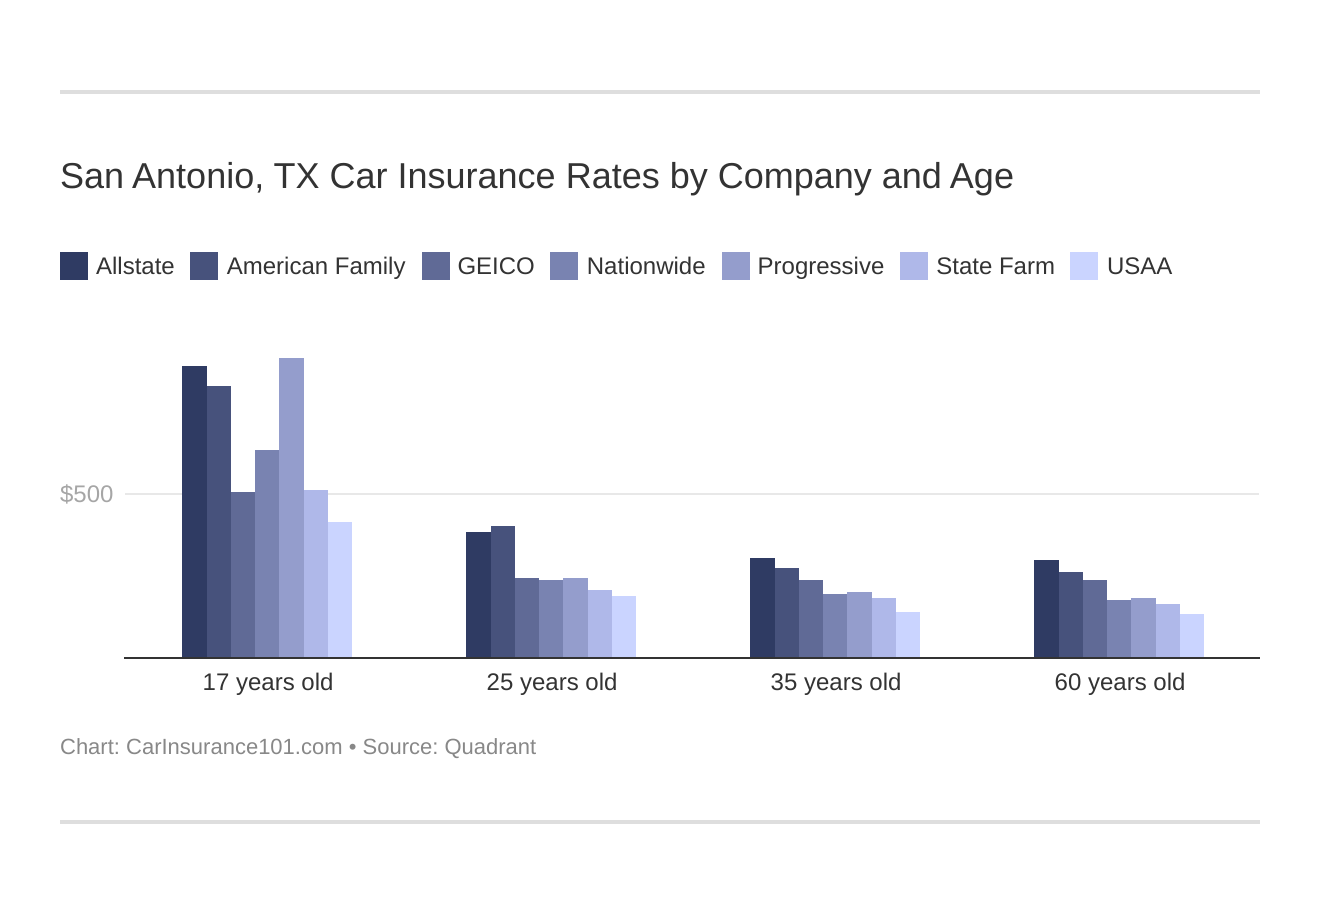 San Antonio, TX Car Insurance Rates by Company and Age